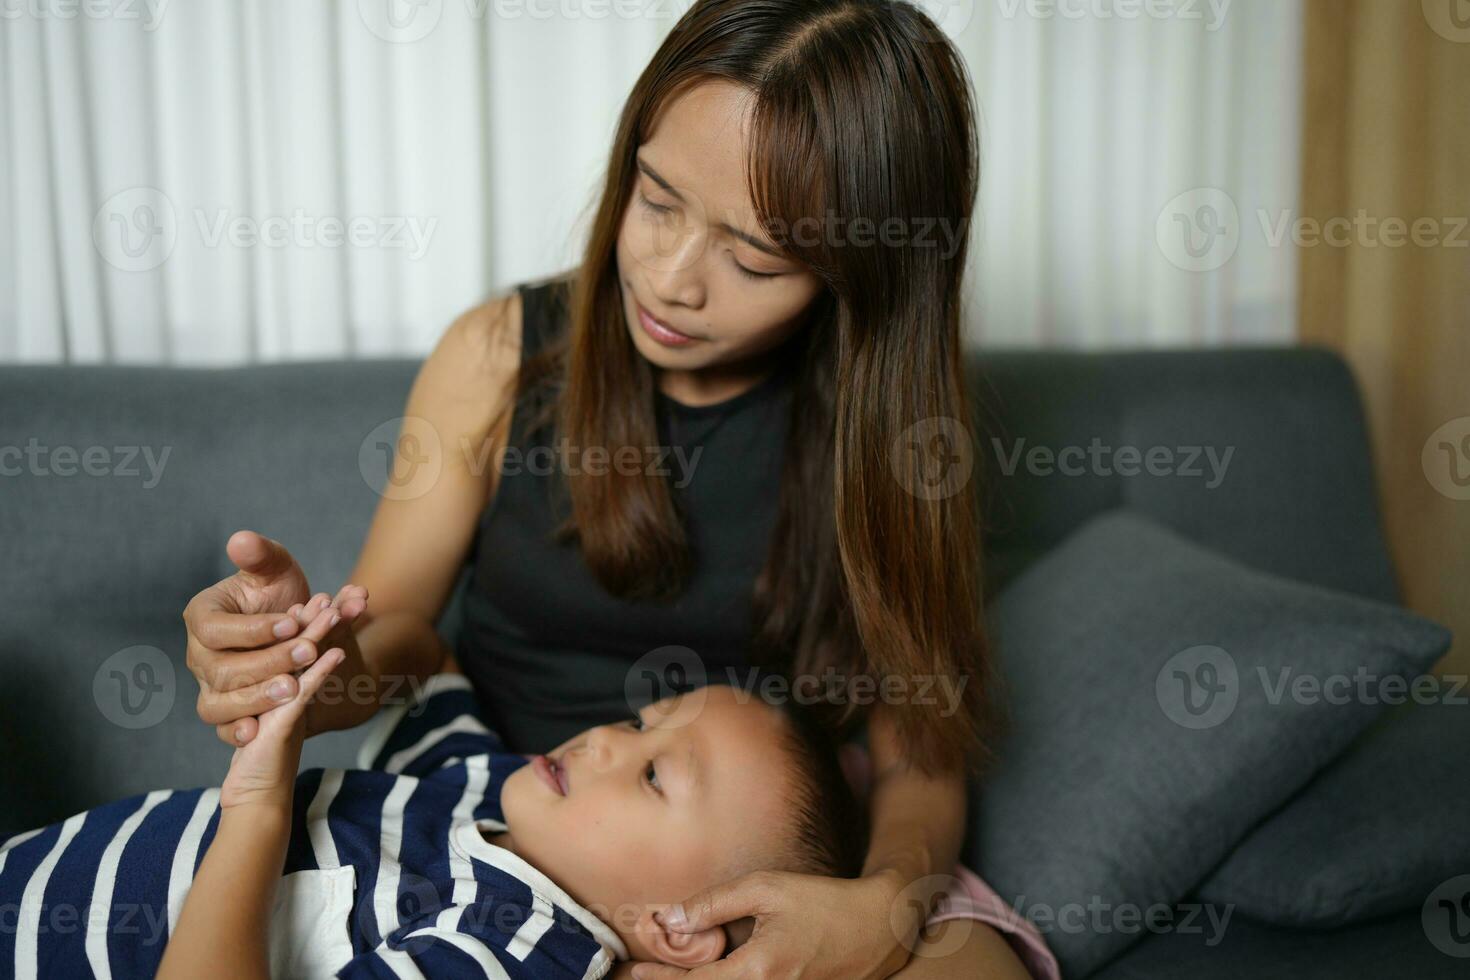 A son sleeps on his mother's lap inside the house. photo